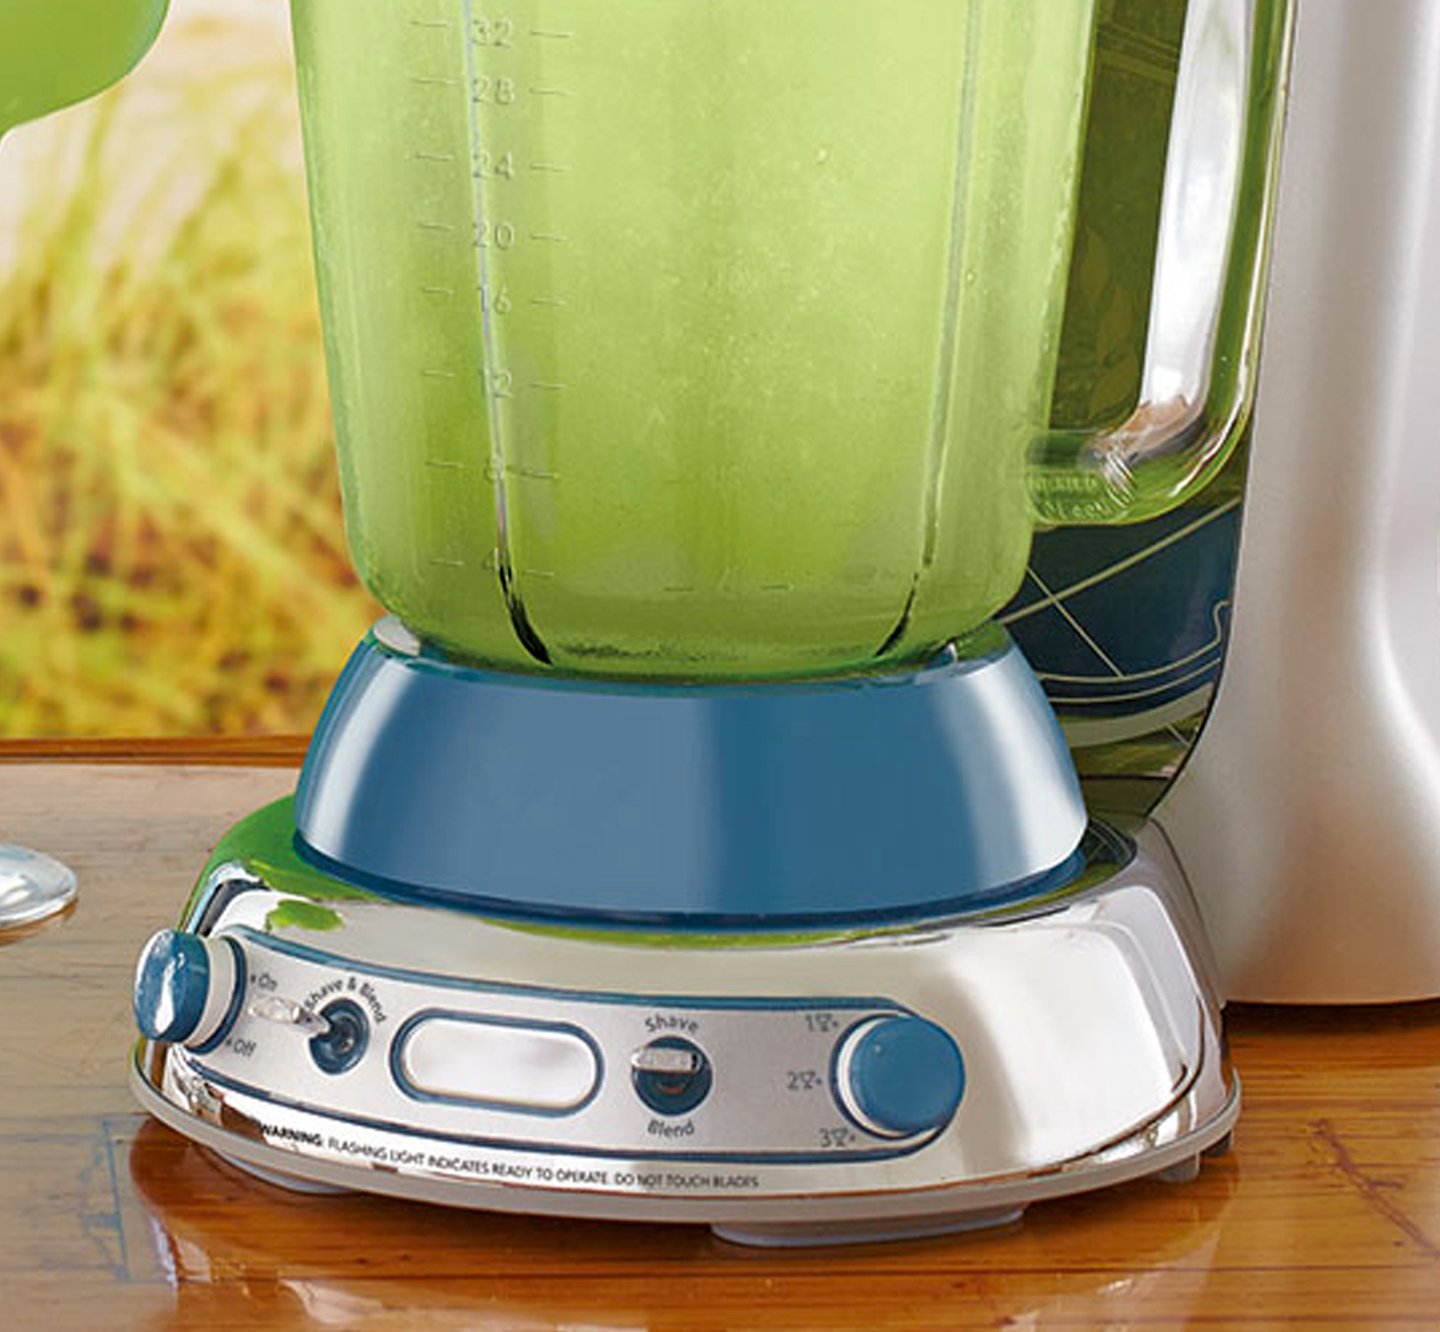 How to Make Frozen Drinks with the Margaritaville Concoction Maker - DM1000  